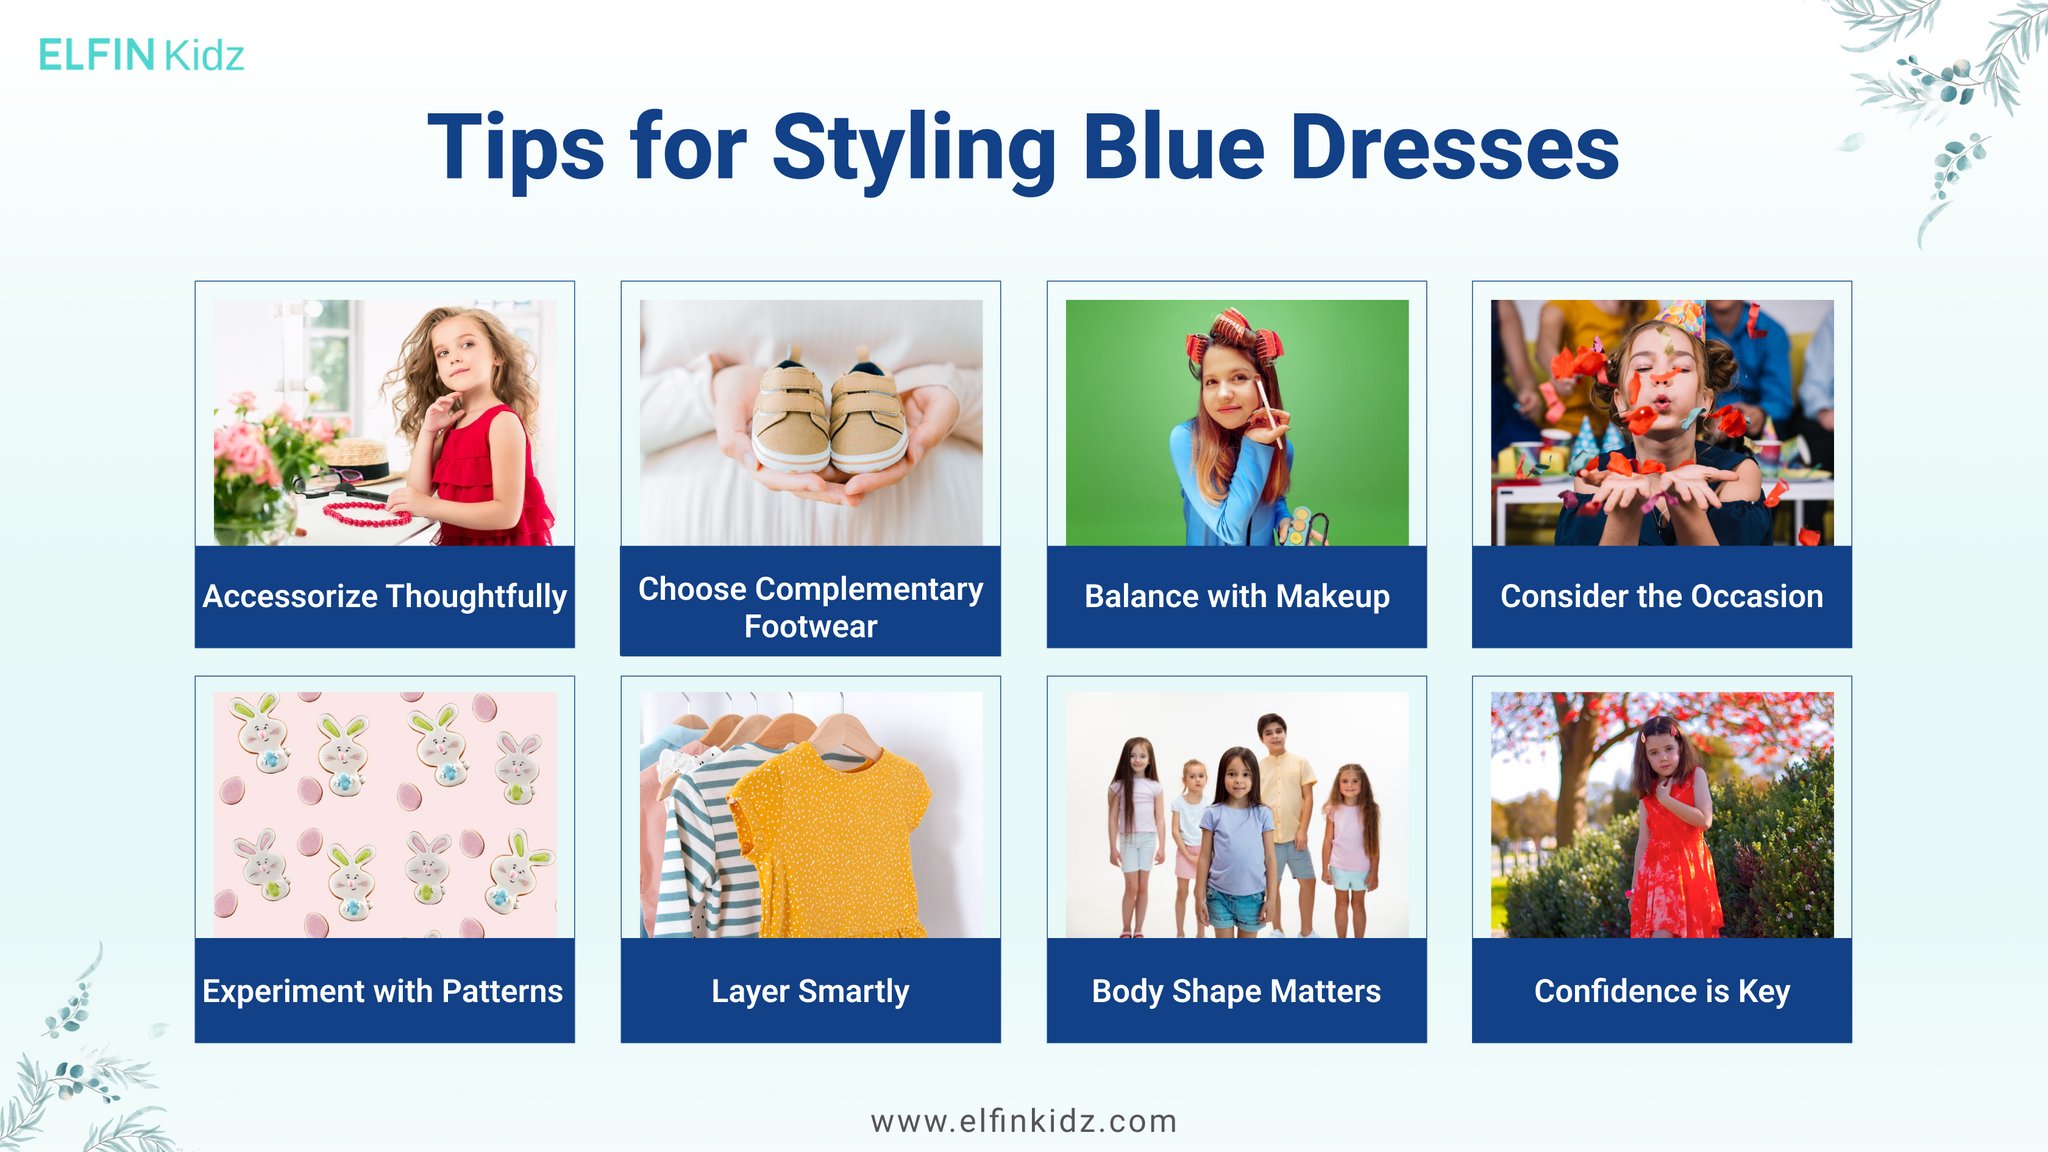 Tips for Styling Blue Dresses